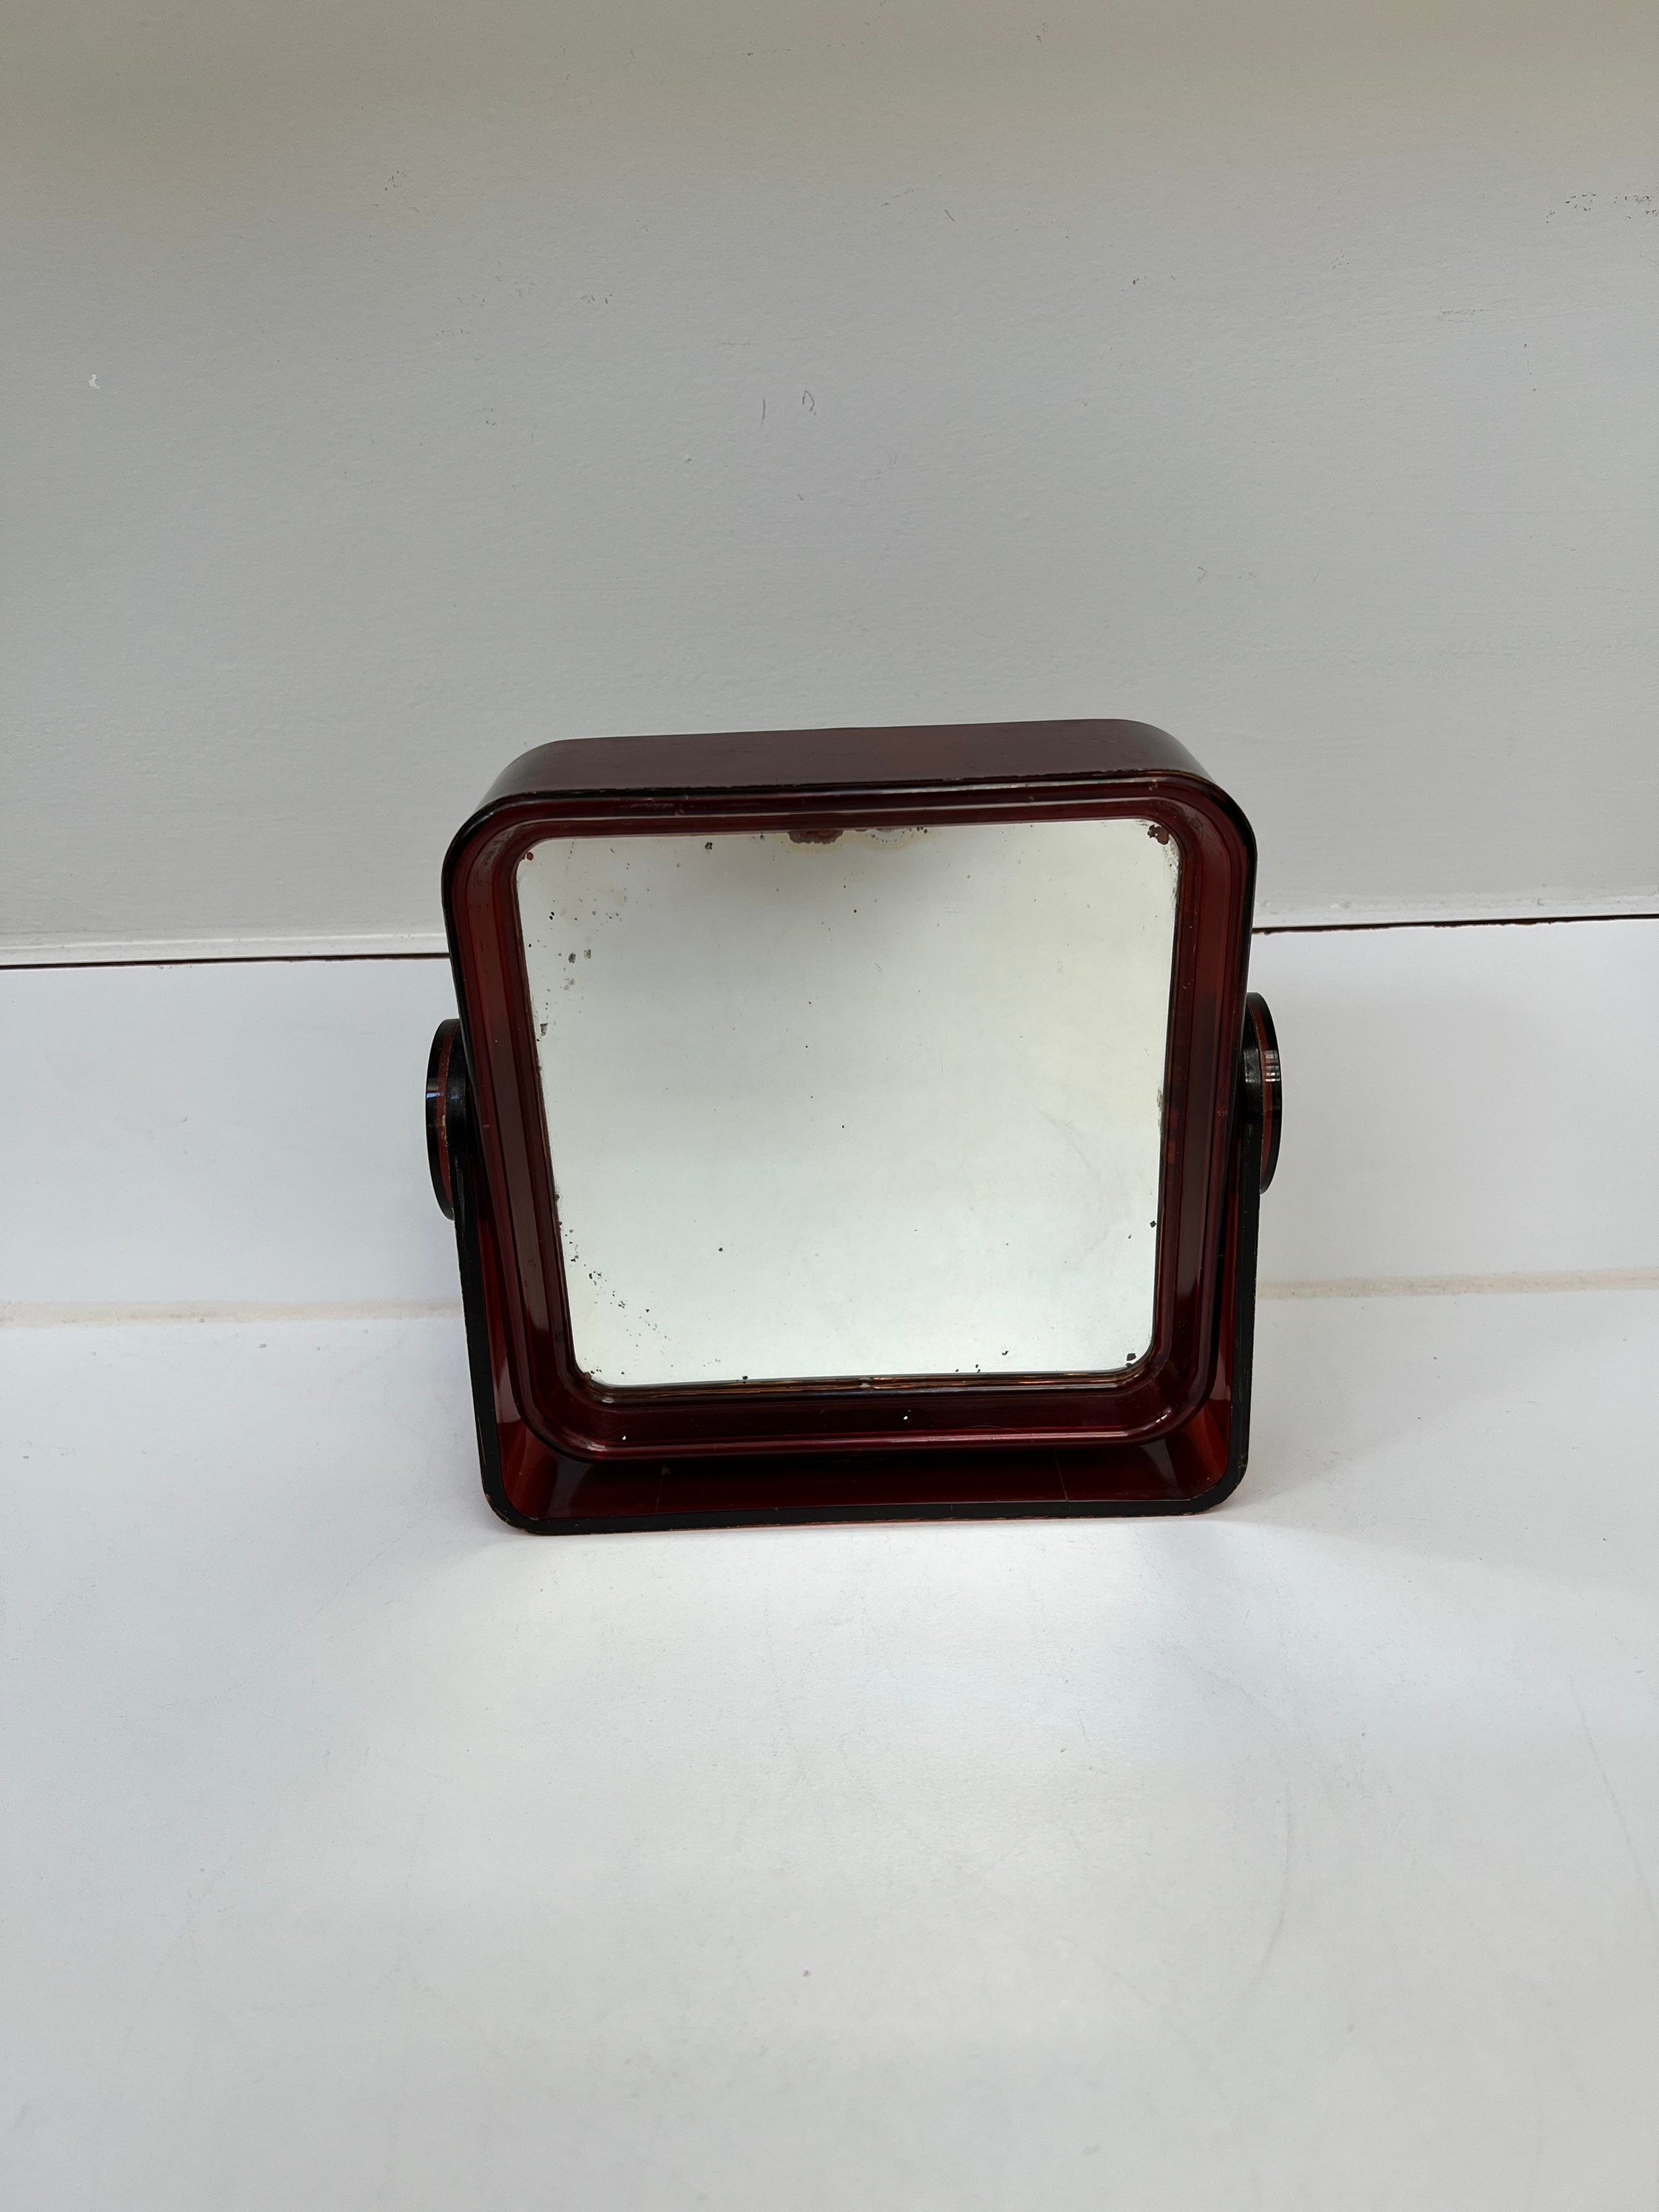 2 Right And Left Square Mirrors Far Used (RETRODGYAMOCC)